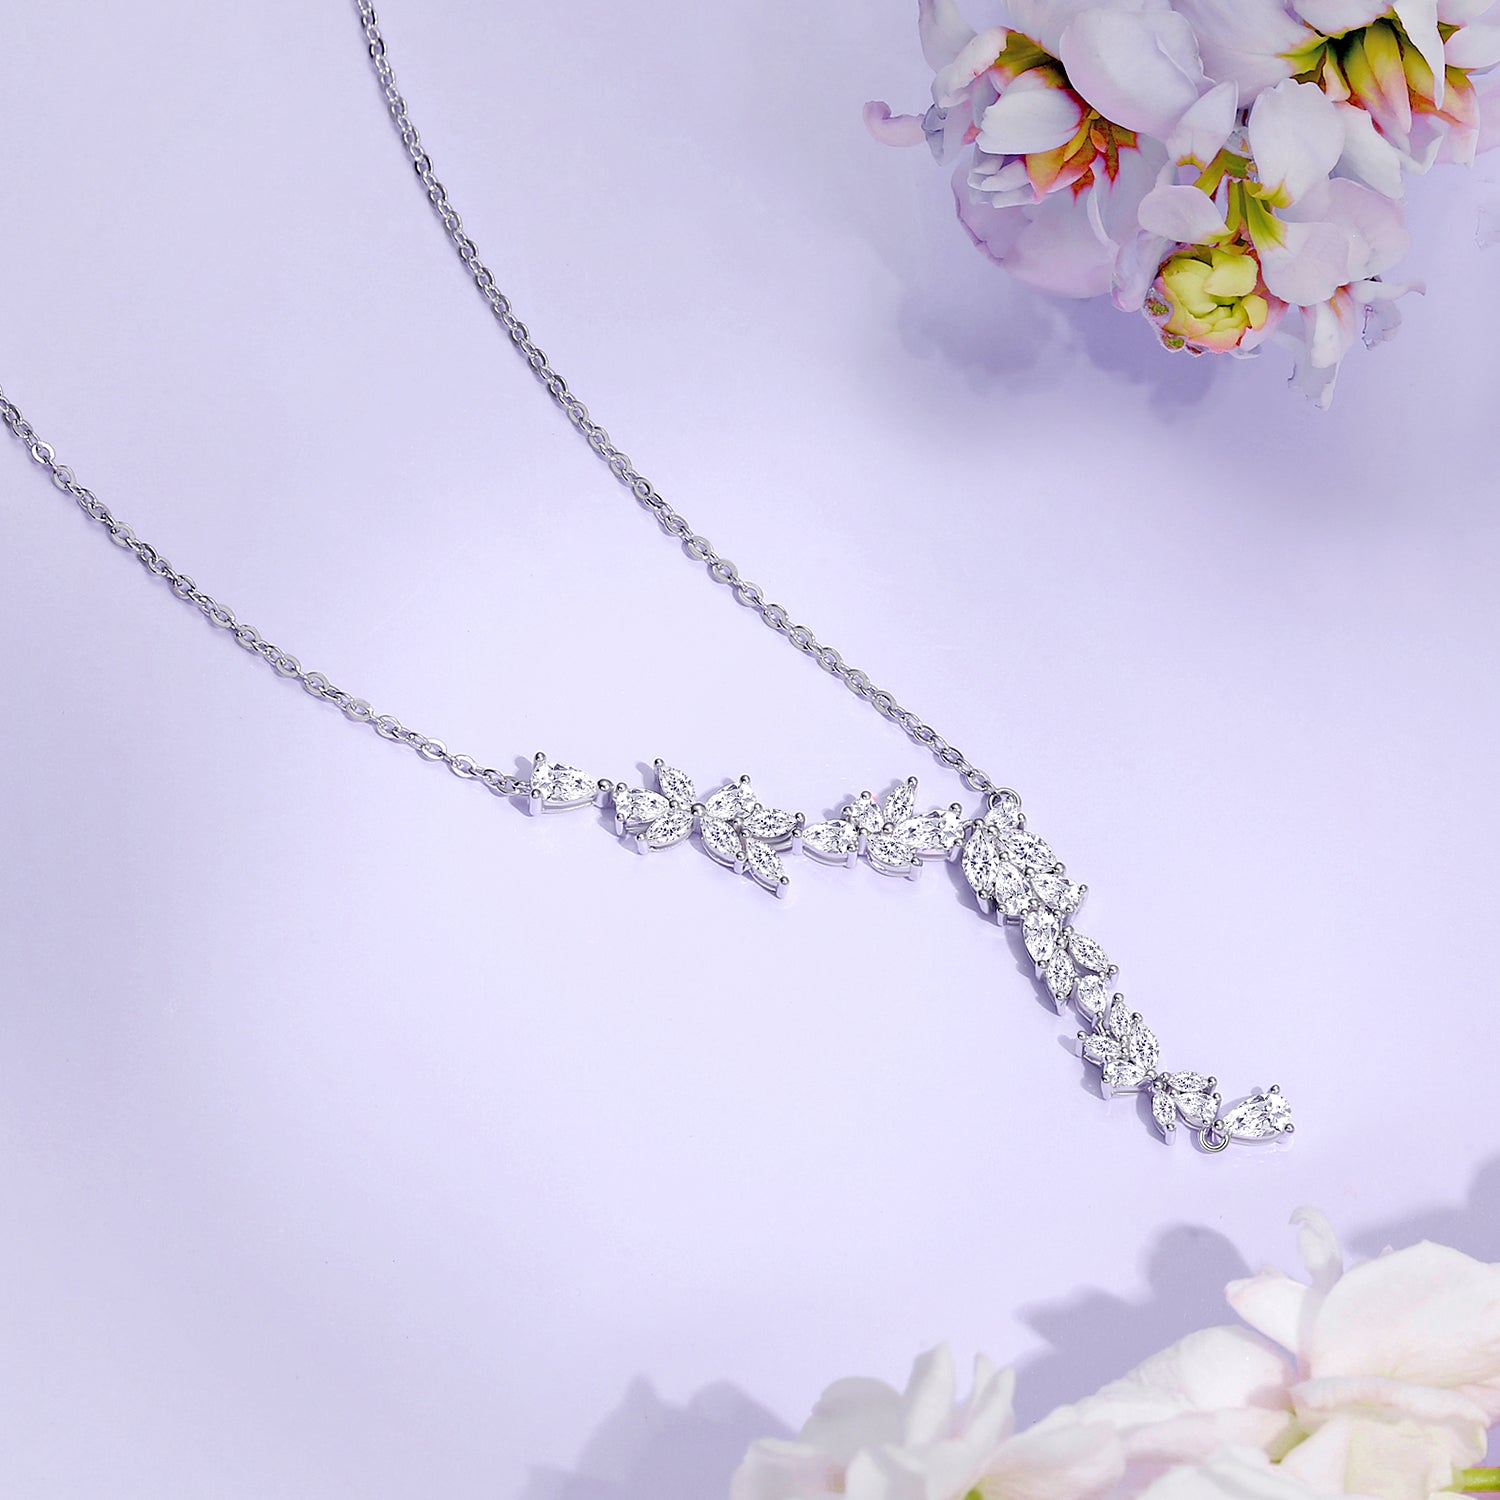 FANCIME "Wisteria Reverie" Flower Drop Y Sterling Silver Necklace Show2